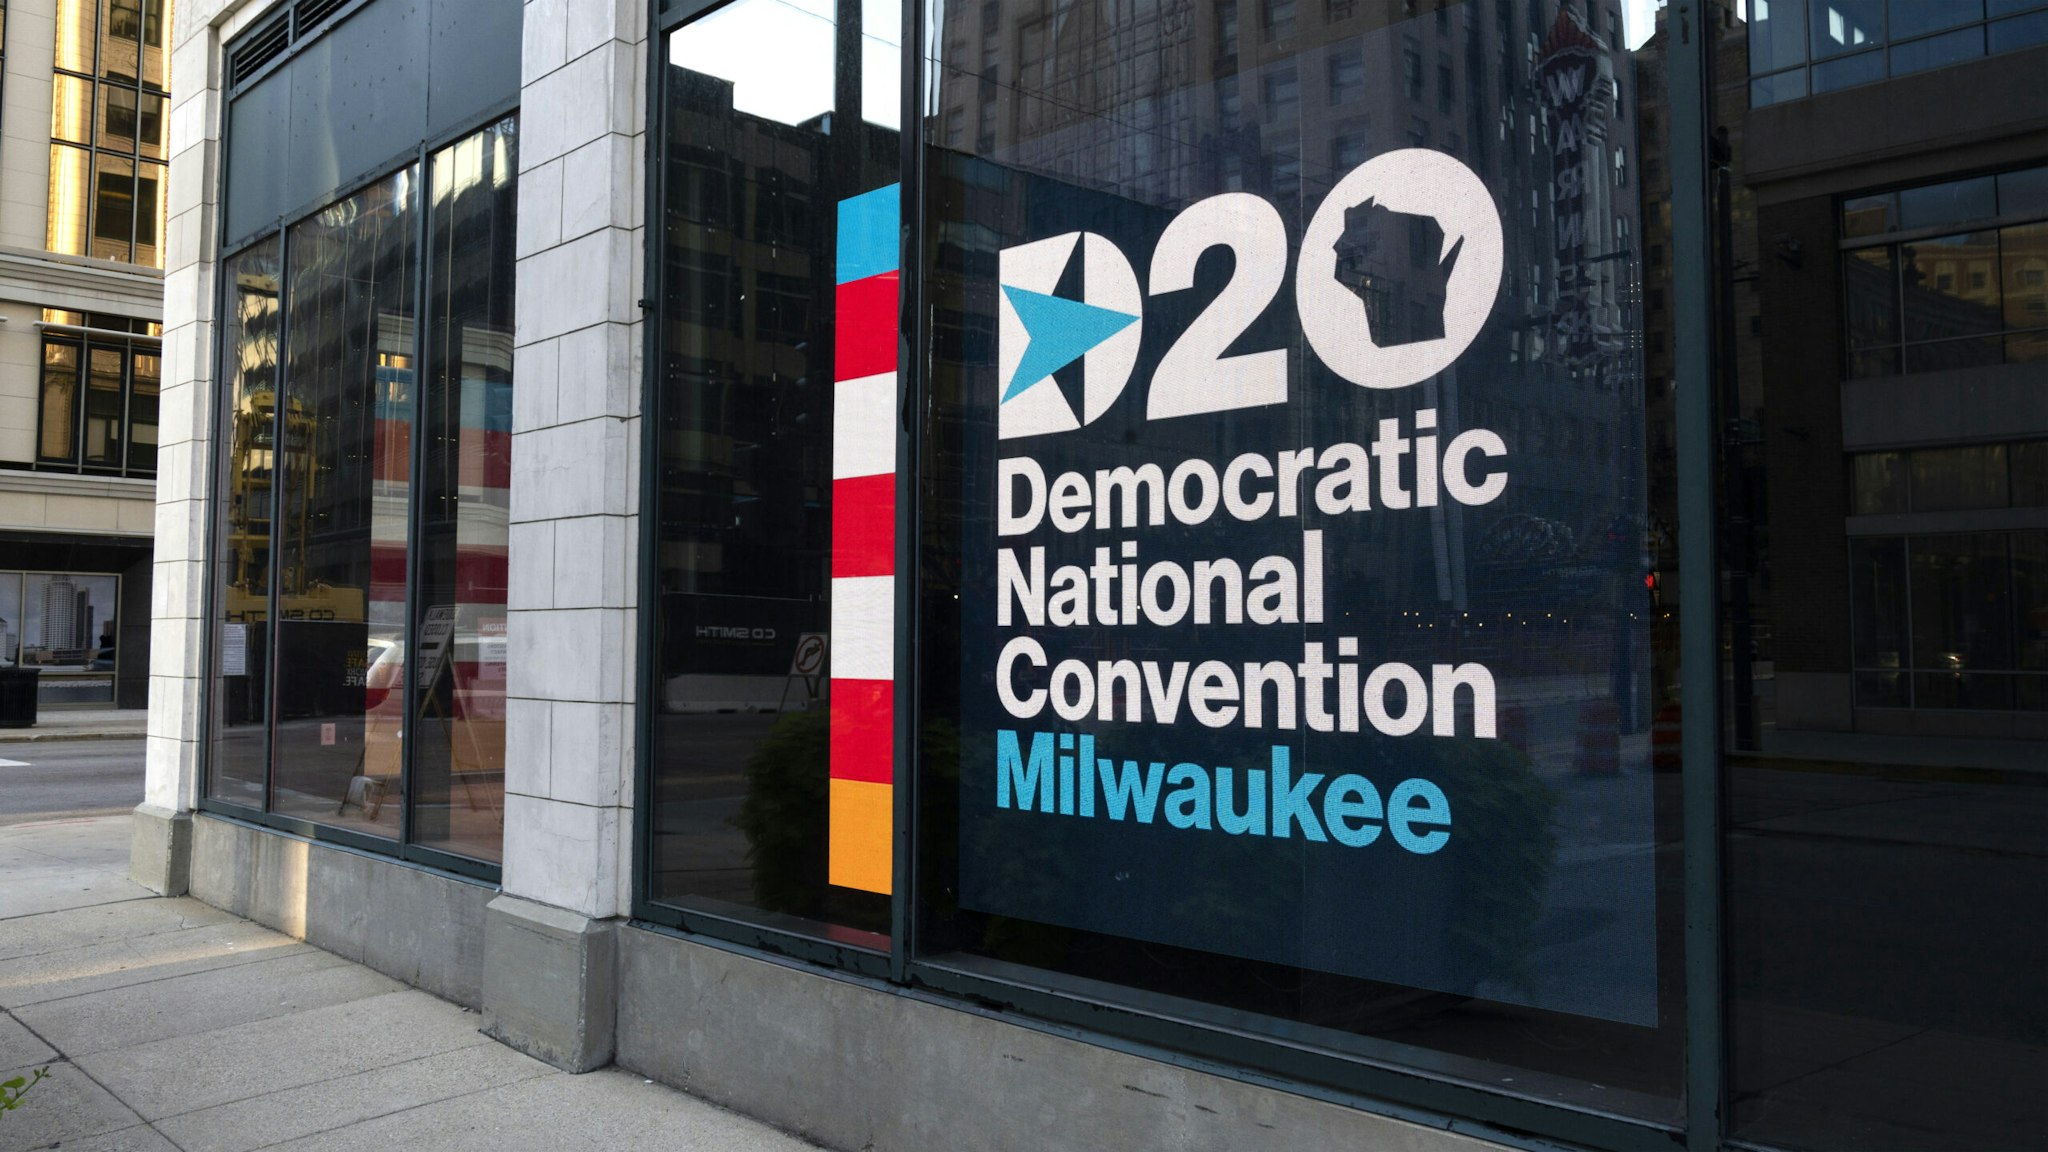 Signage for the Democratic National Convention is displayed near the Wisconsin Center in Milwaukee, Wisconsin, U.S., on Sunday, Aug. 16, 2020. A full slate of Democratic stars will take the virtual stage at the partys convention next week, from one-time presidential candidates, to beloved former officials to up-and-comers.